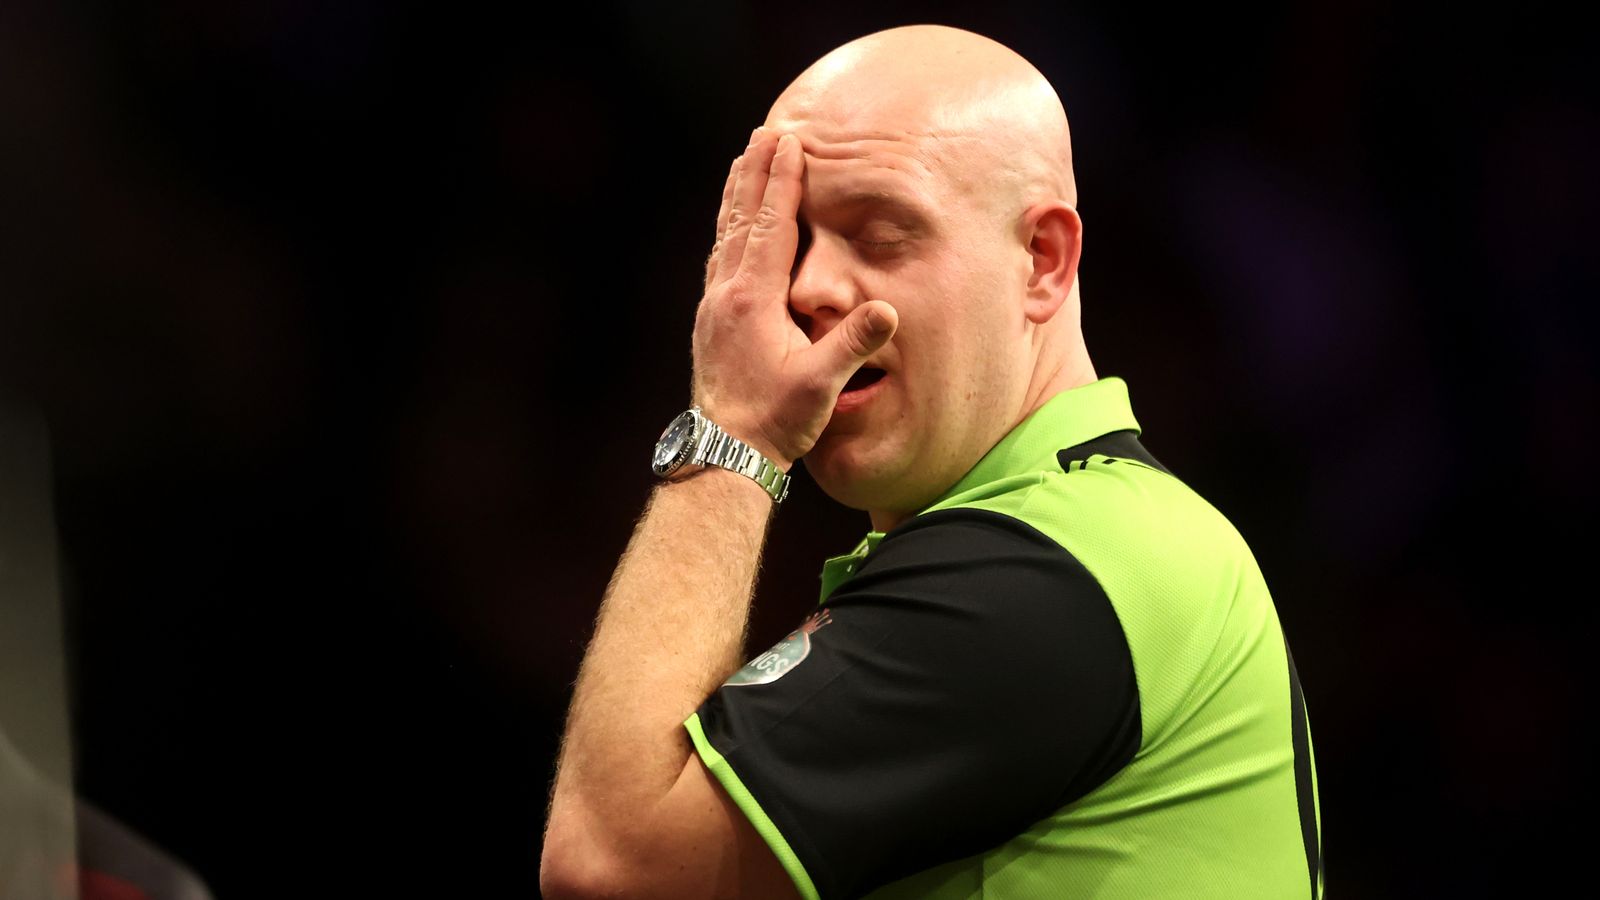 Premier League Darts: Is Michael van Gerwen in danger of missing out on Play-Offs for just second time? | Darts News